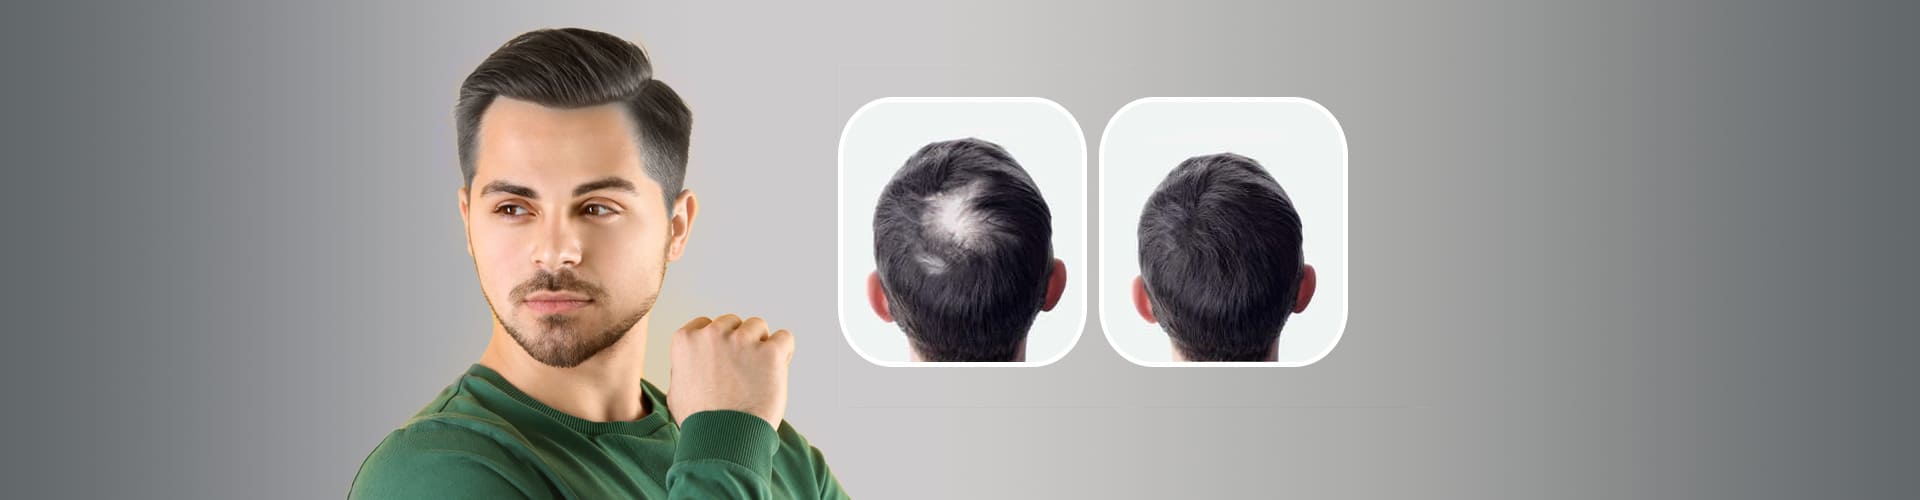 Hair Transplant Before and After result